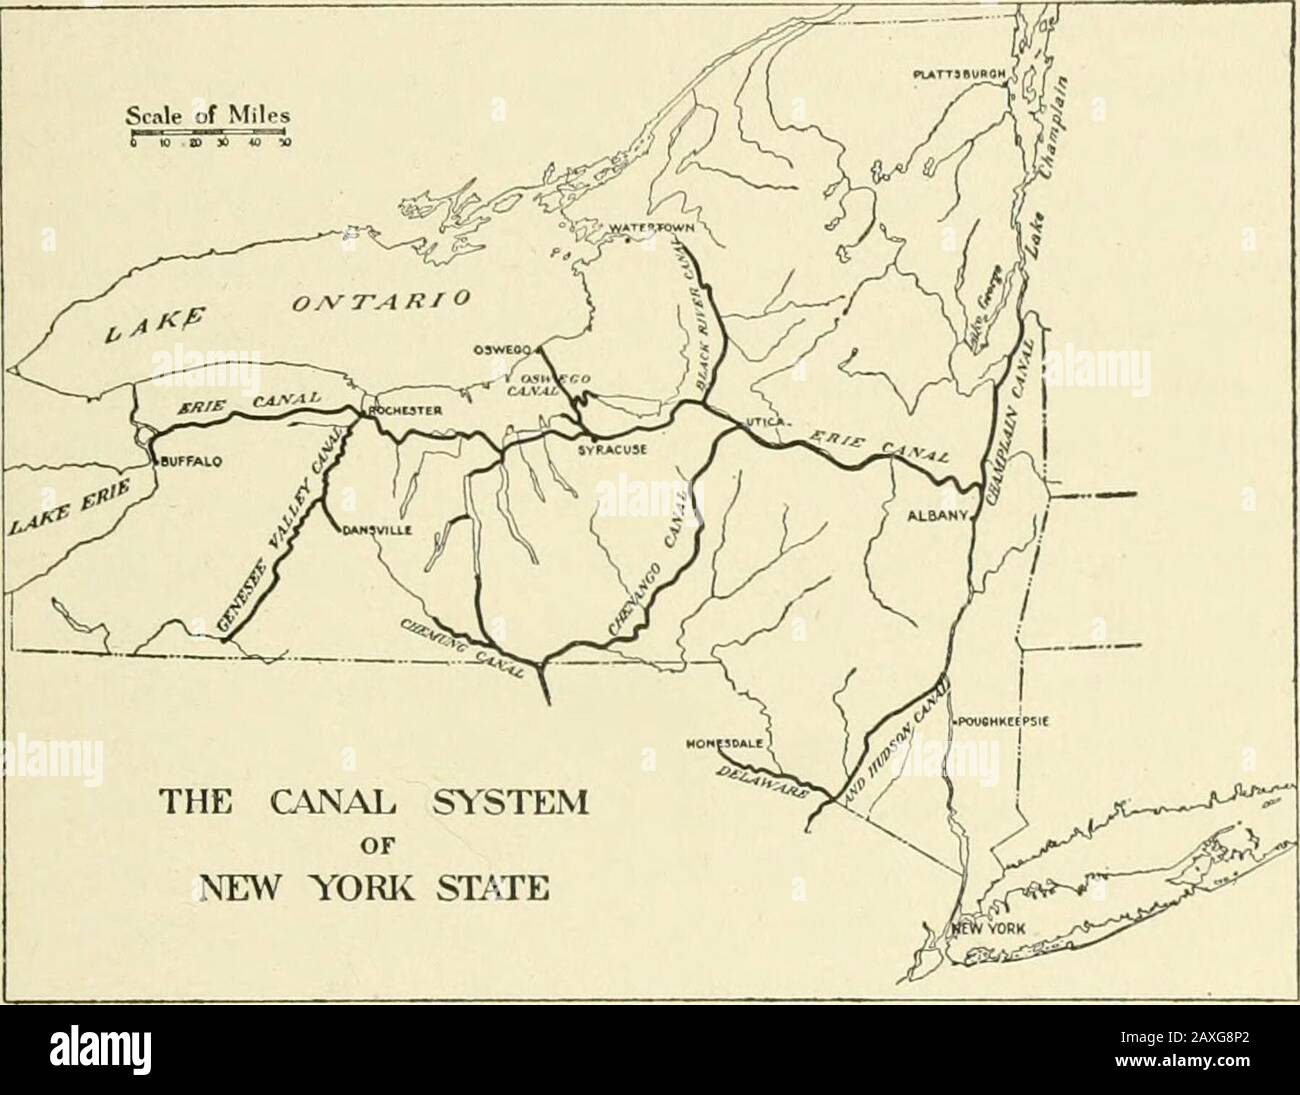 New York's part in history . her canal system. The following were the principal canals of the state: theErie connecting Lake Erie with the Hudson at Albany; theChamplain connecting Lake Champlain at Whitehall with theErie Canal near Cohoes; the Chenango Canal extendingthrough the Chenango Valley from Utica to Binghamton toreach the Pennsylvania coal fields; the Delaware and HudsonCanal connecting the Hudson River at Kingston with theDelaware River at Port Jervis and from there tapping thecoal fields in northern Pennsylvania; the Oswego Canal con-necting Lake Ontario at Oswego with the Erie Can Stock Photo